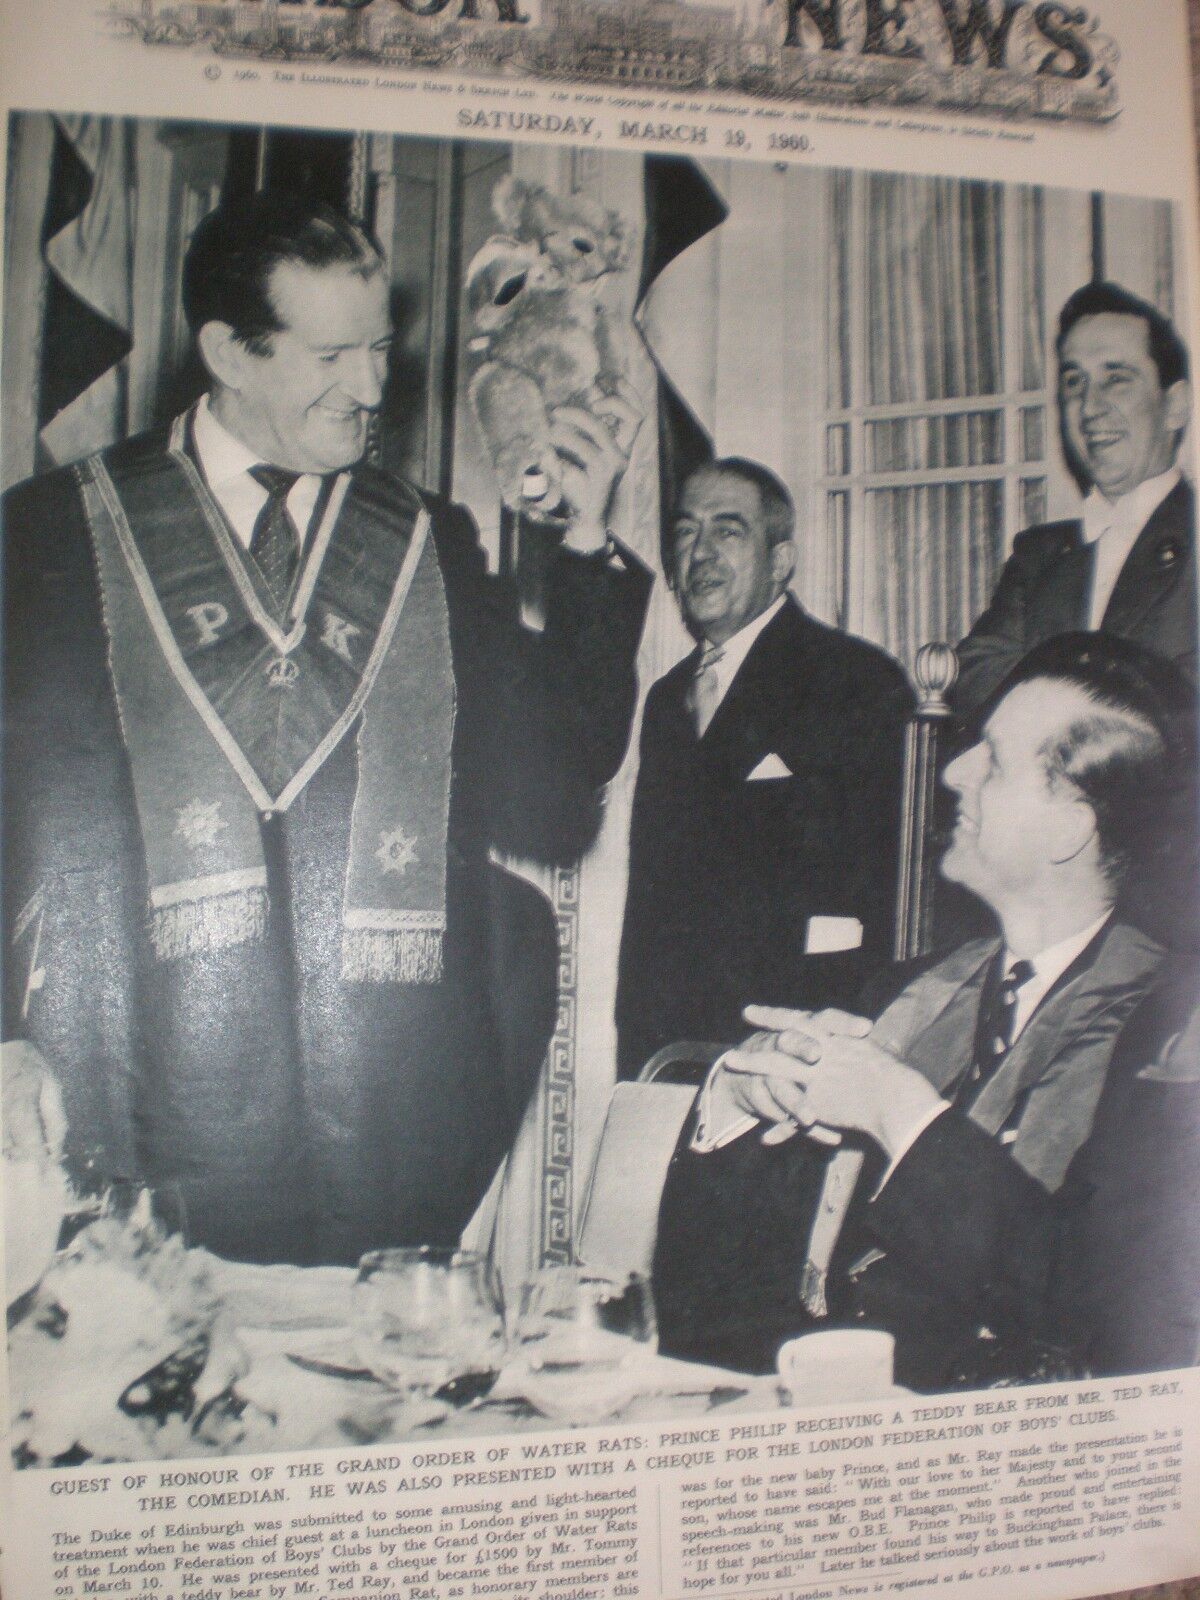 Photo article Ted Ray Prince Philip Grand Order Water Rats 1960 ref AV